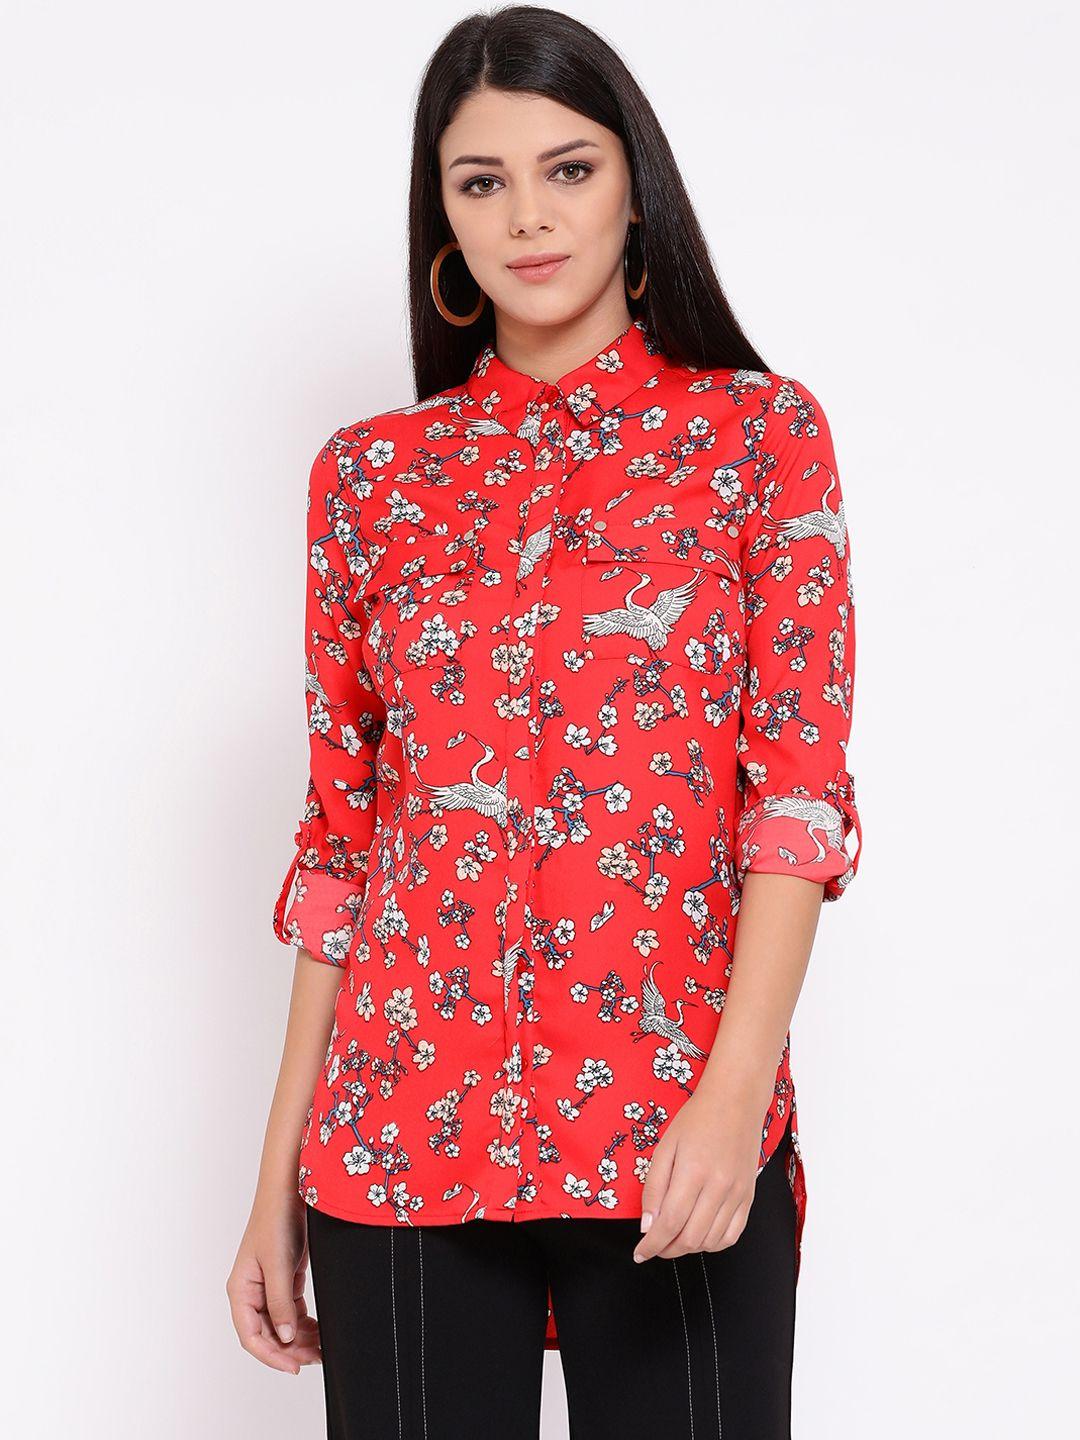 oxolloxo women red & white regular fit floral printed casual shirt